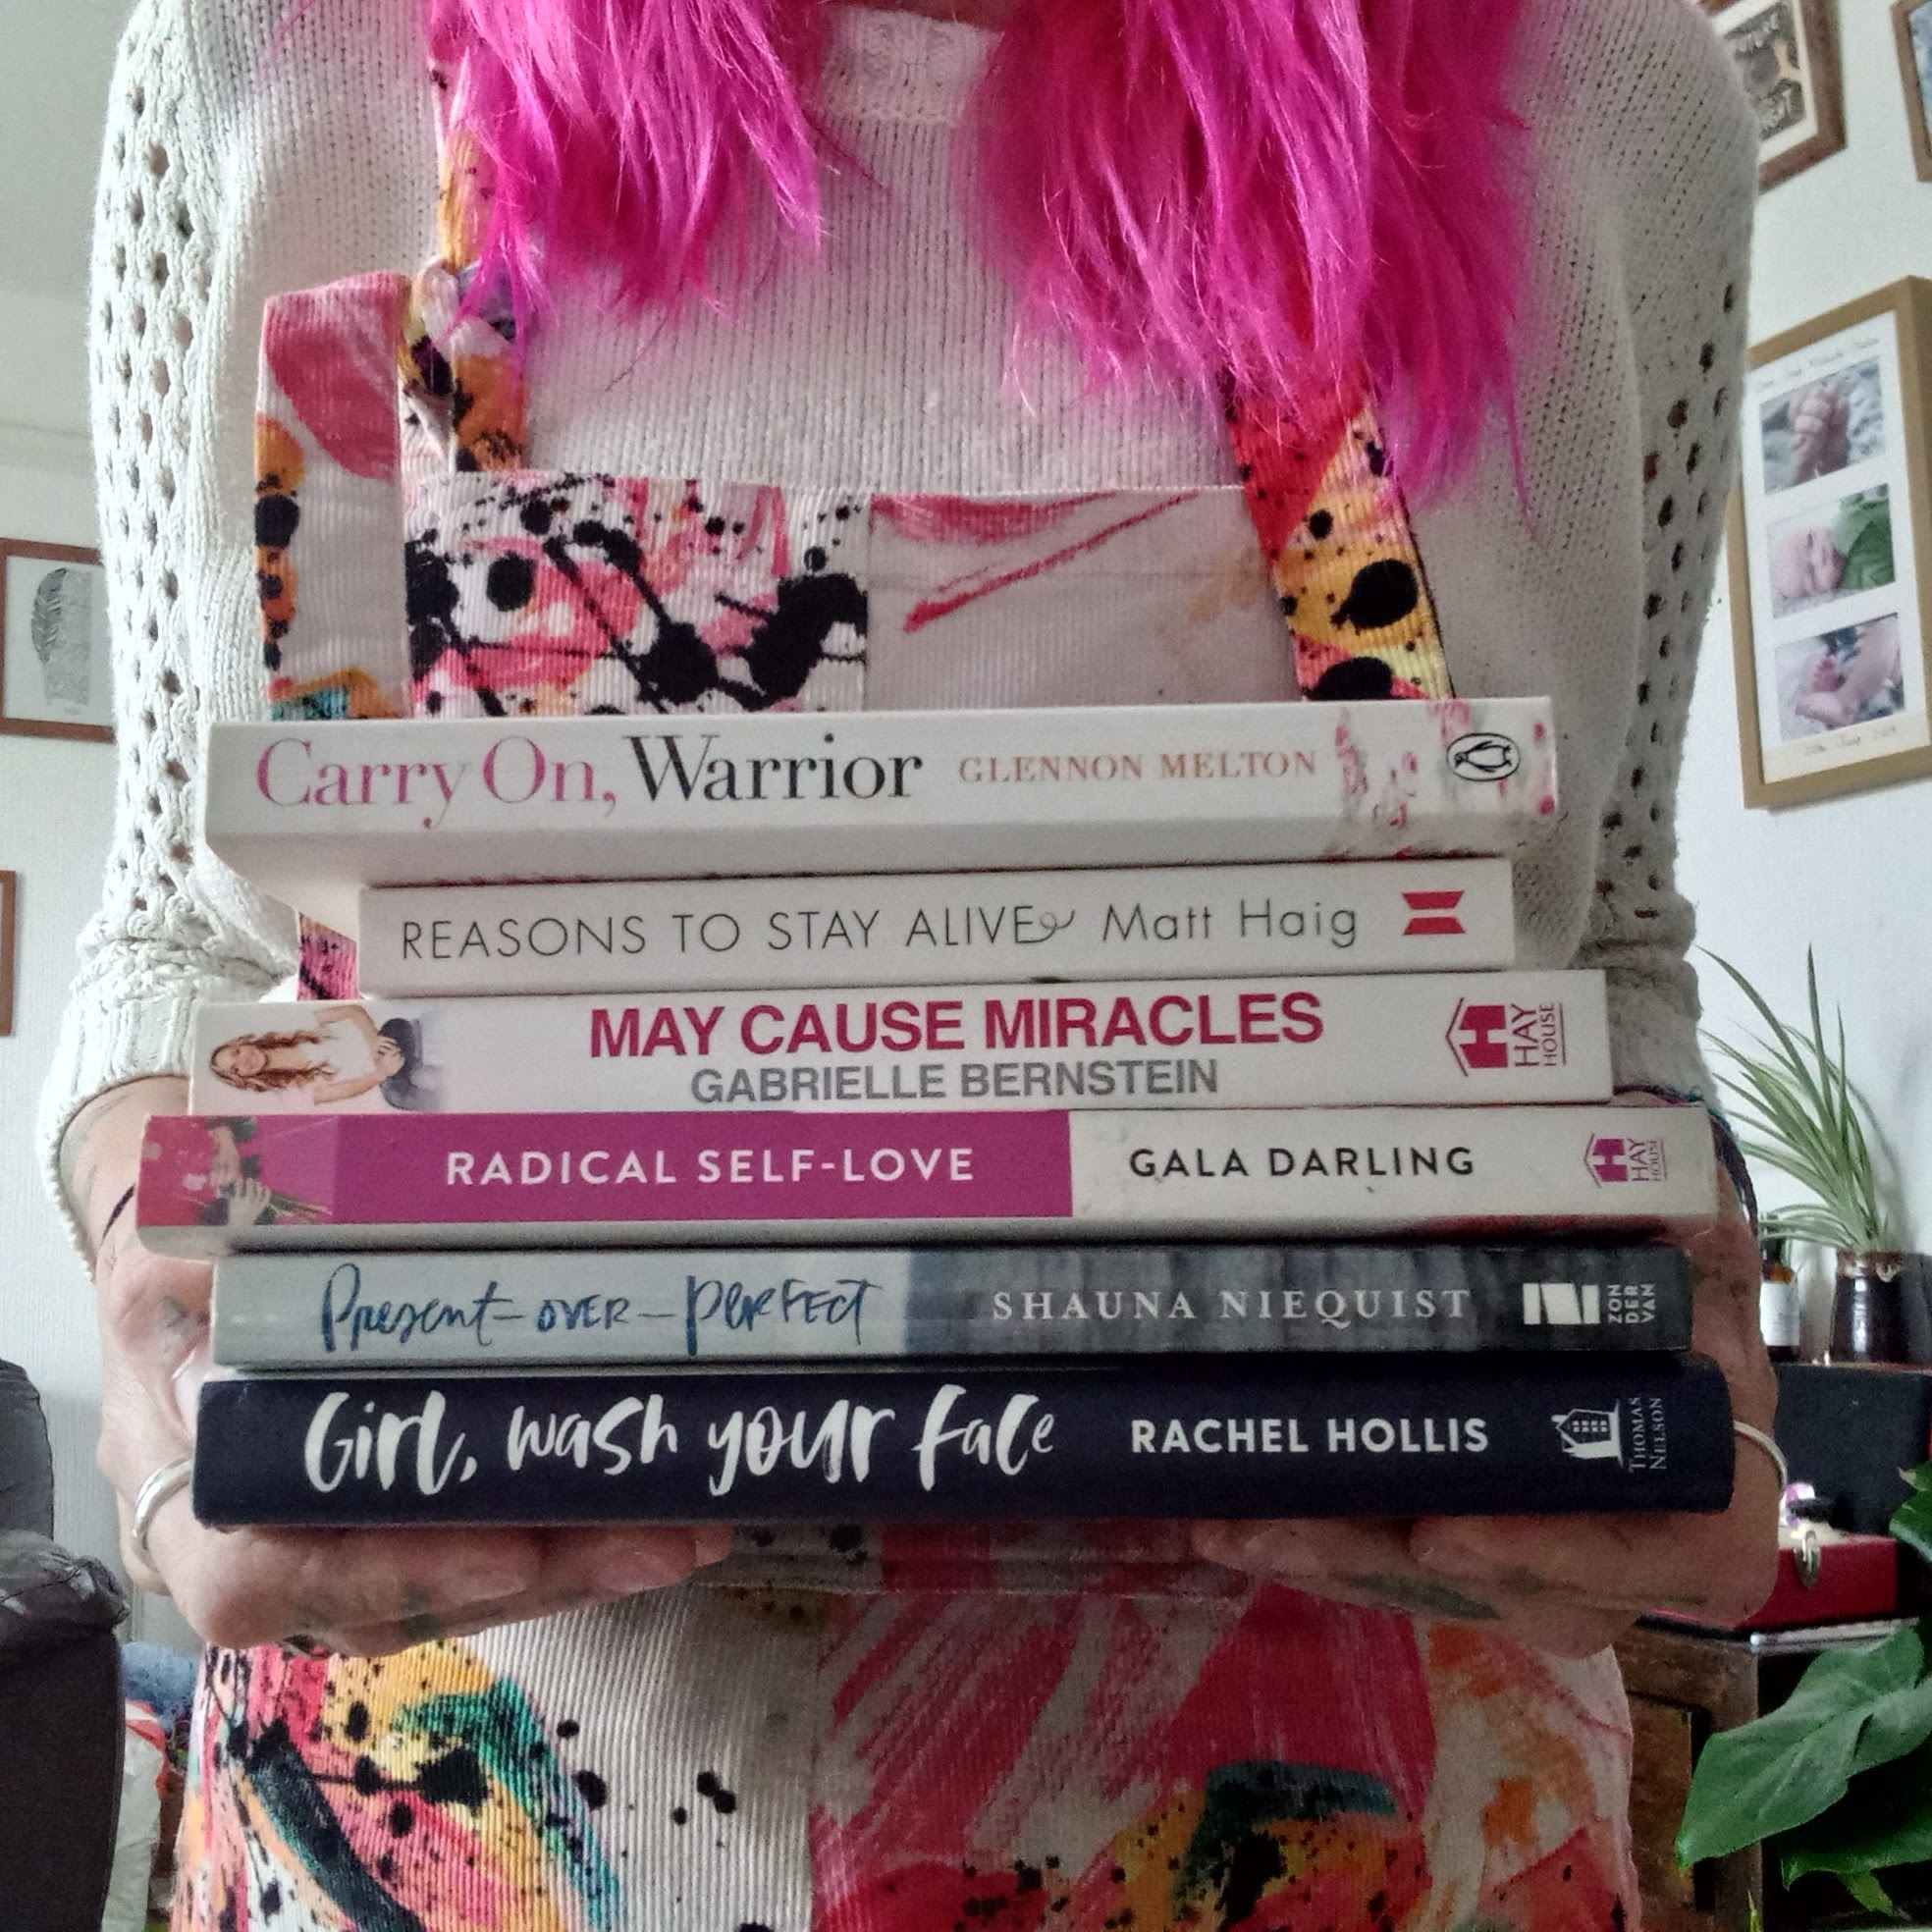 6 of my favourite self-help books